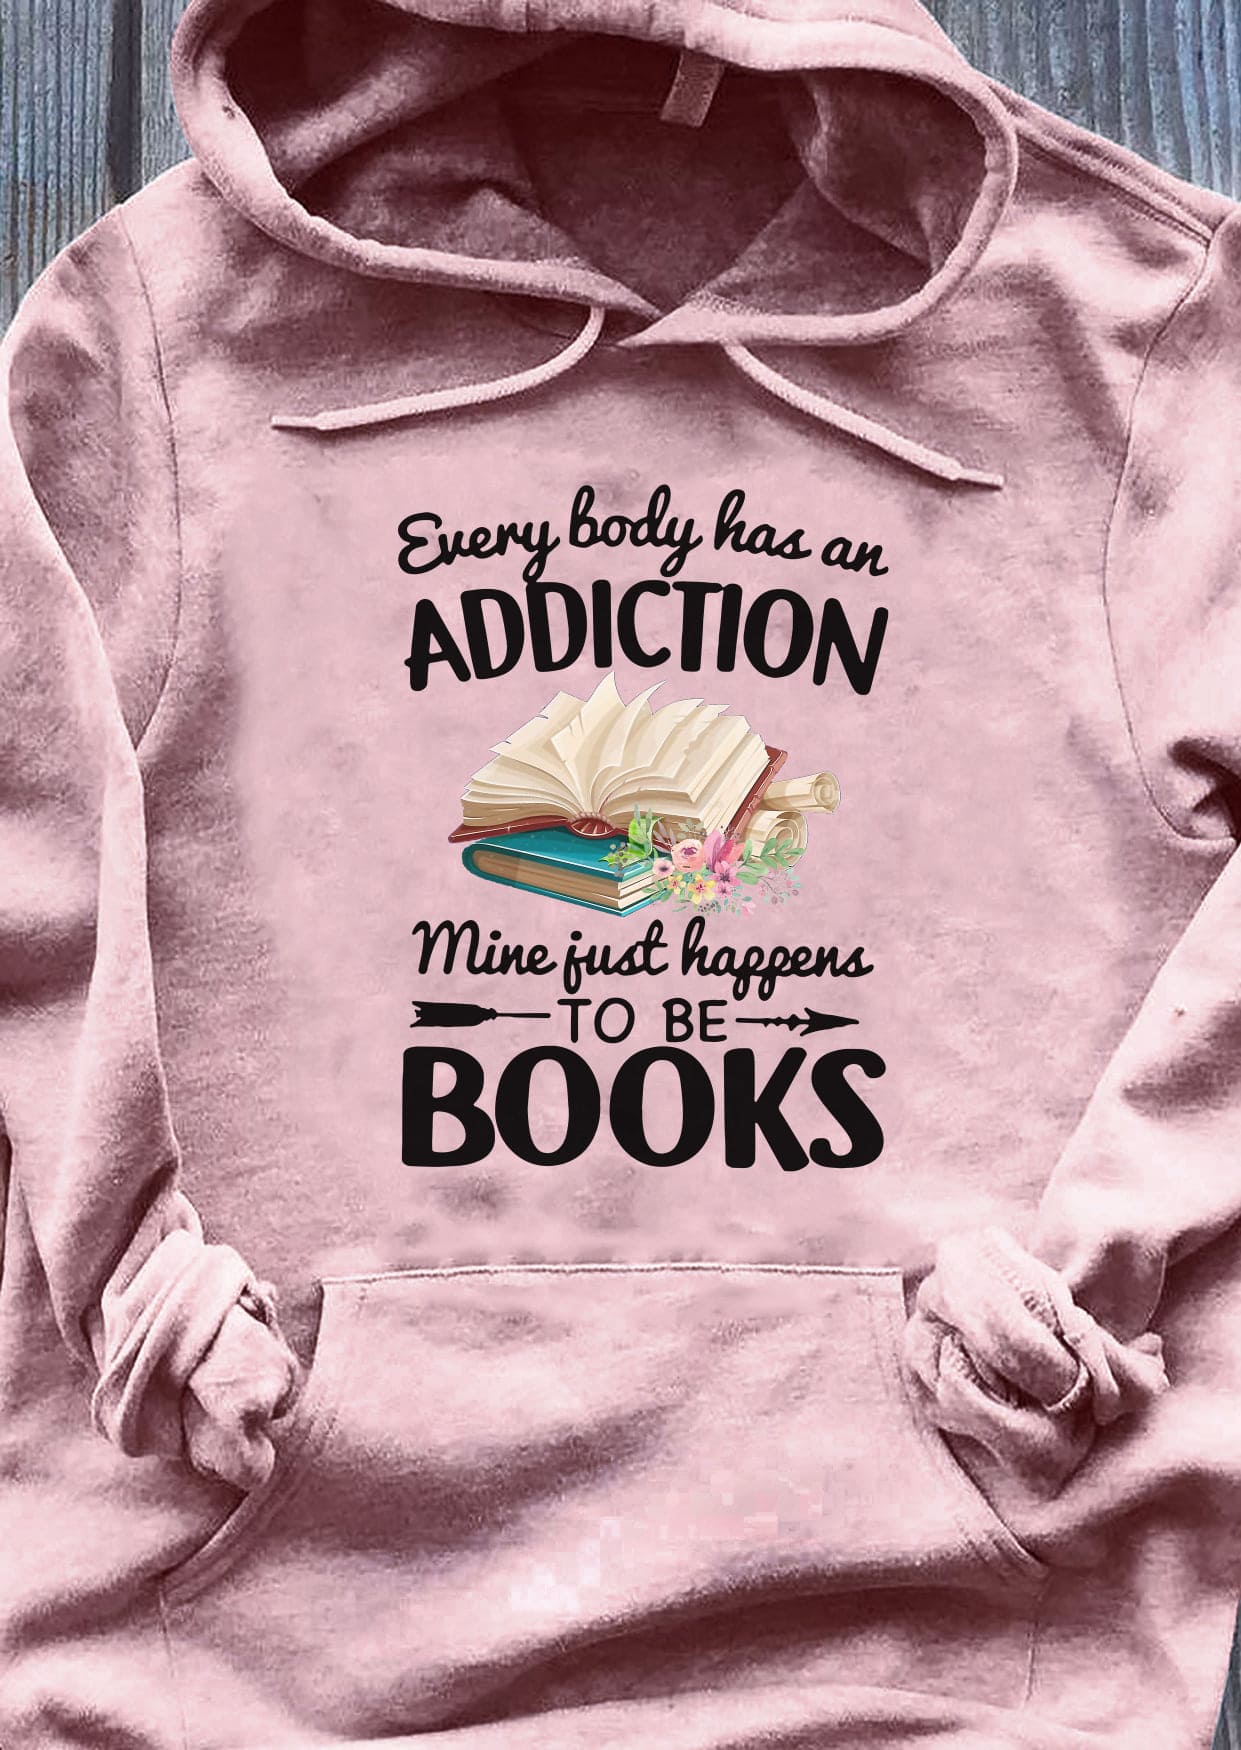 Every body has an addiction, mine just happens to be books - Gift for bookaholic, addicted to book